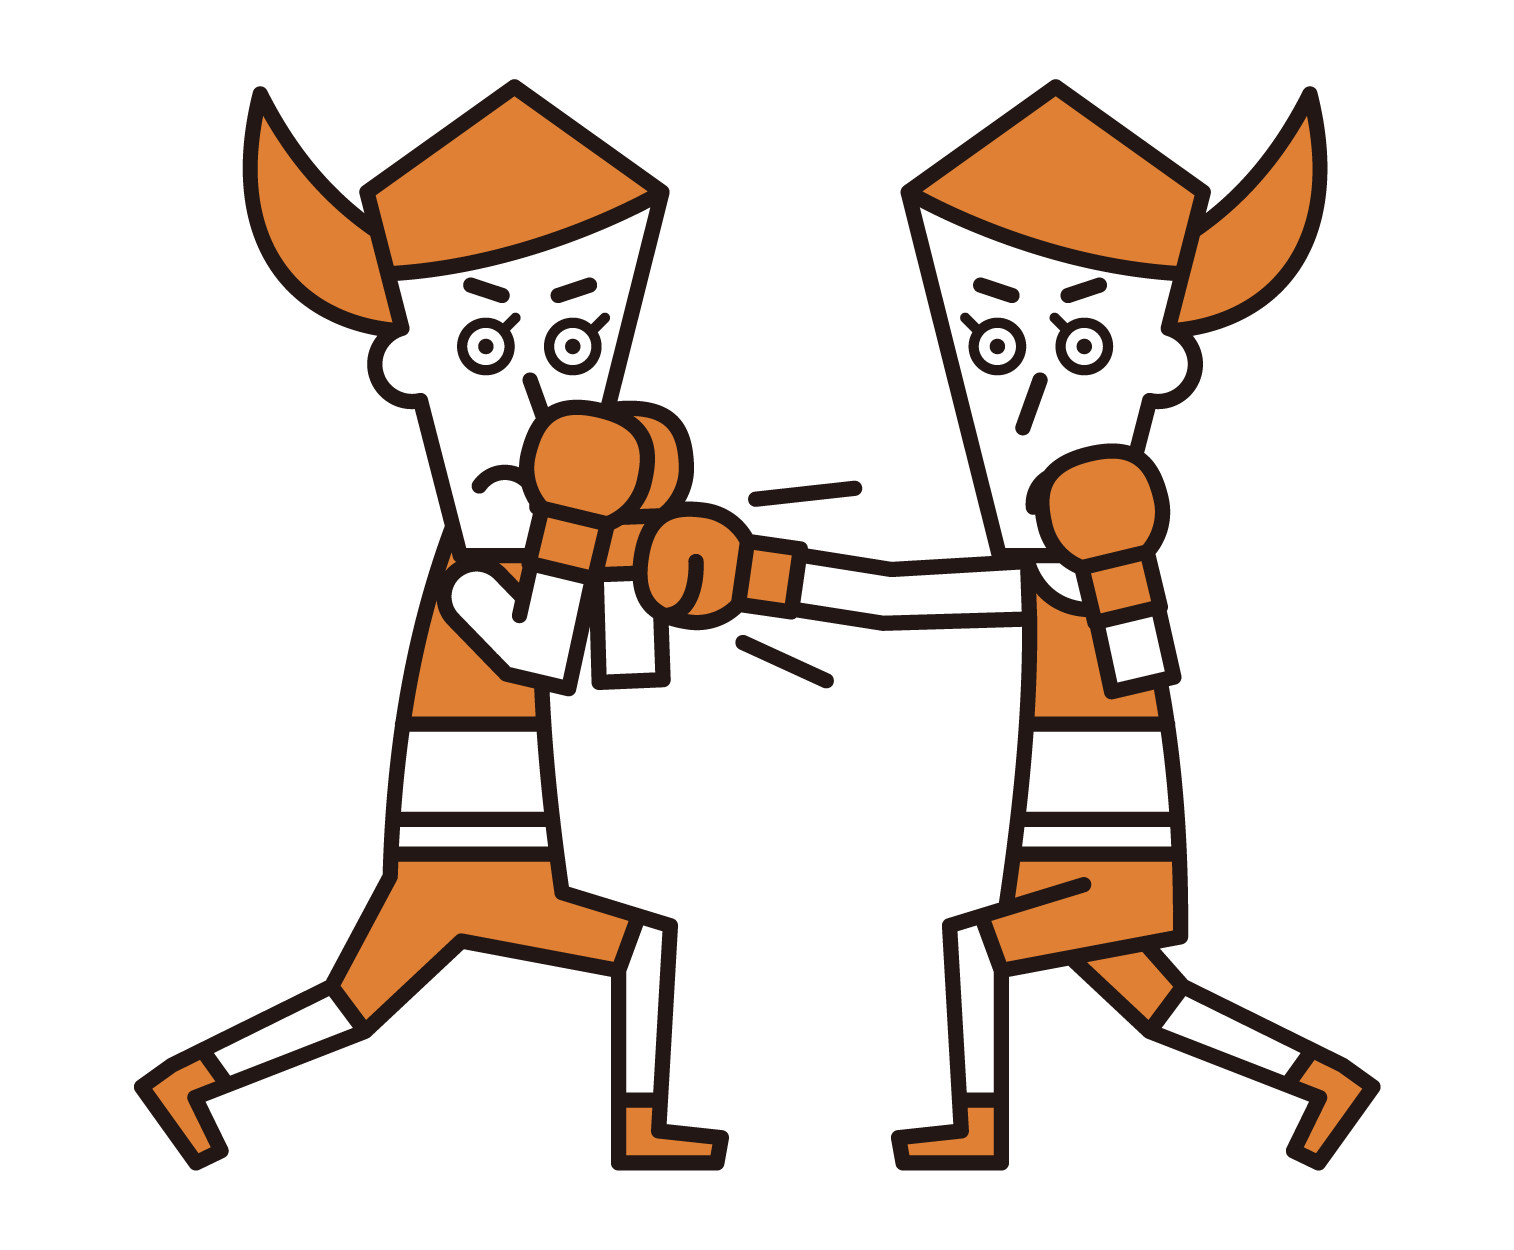 Illustration of a boxing player (female) sparring